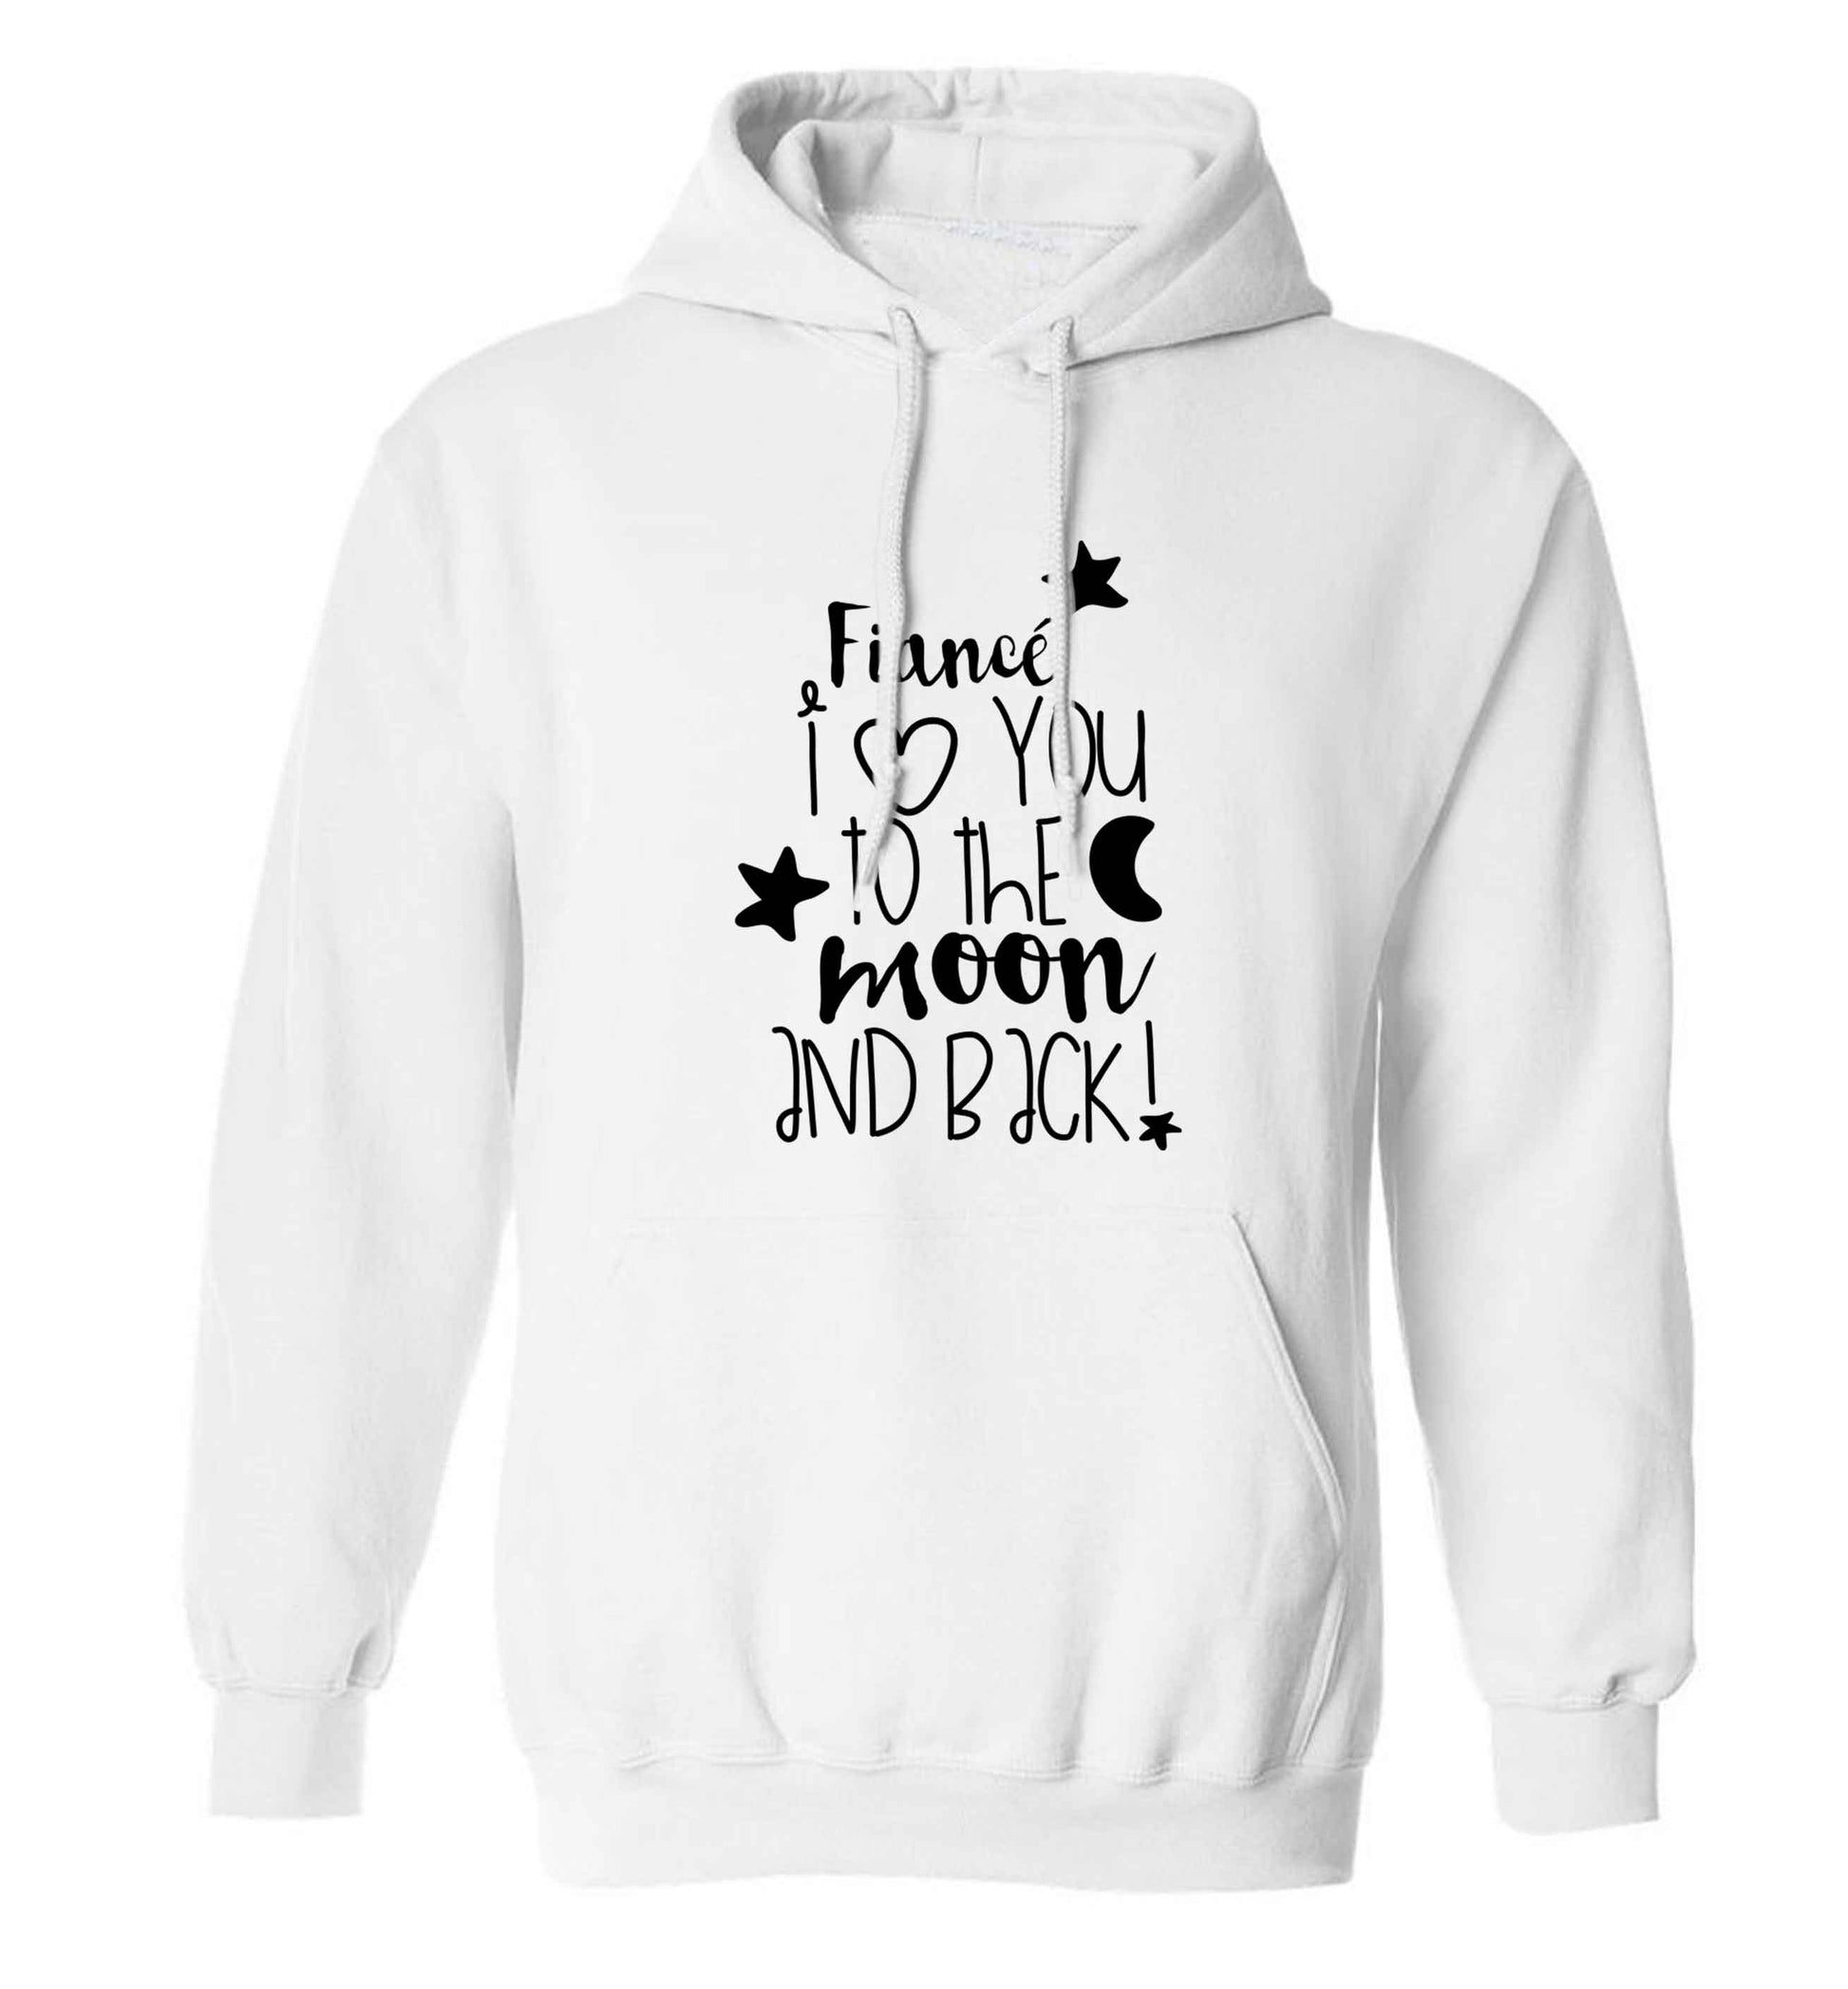 Fianc√© I love you to the moon and back adults unisex white hoodie 2XL